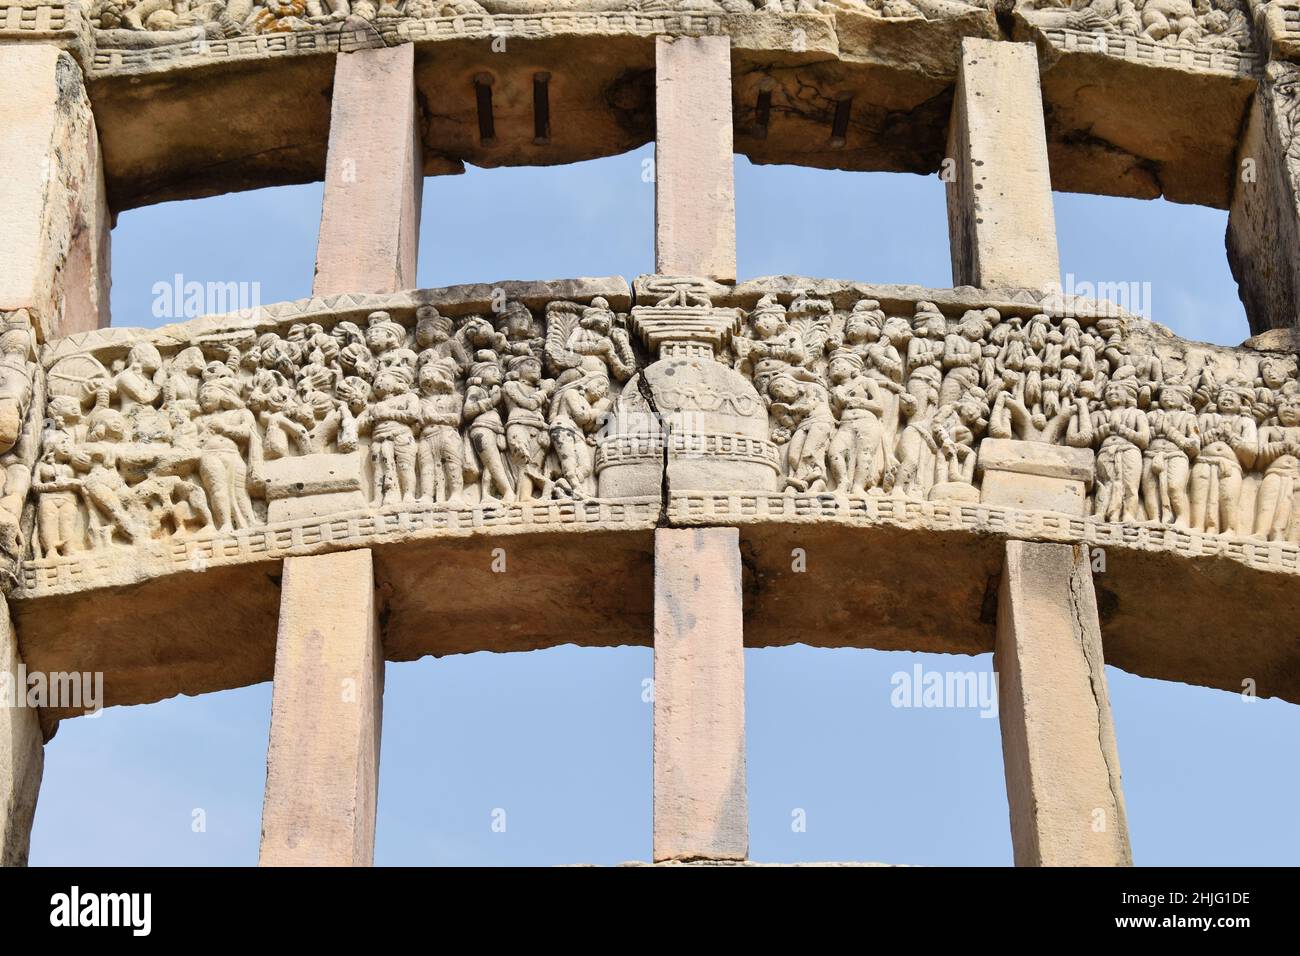 Stupa No. 3, Middle Architrave, Buddhas represented by Chaitya and Two Bodhi Trees. Sanchi monuments, World Heritage Site, Madhya Pradesh, India. Stock Photo